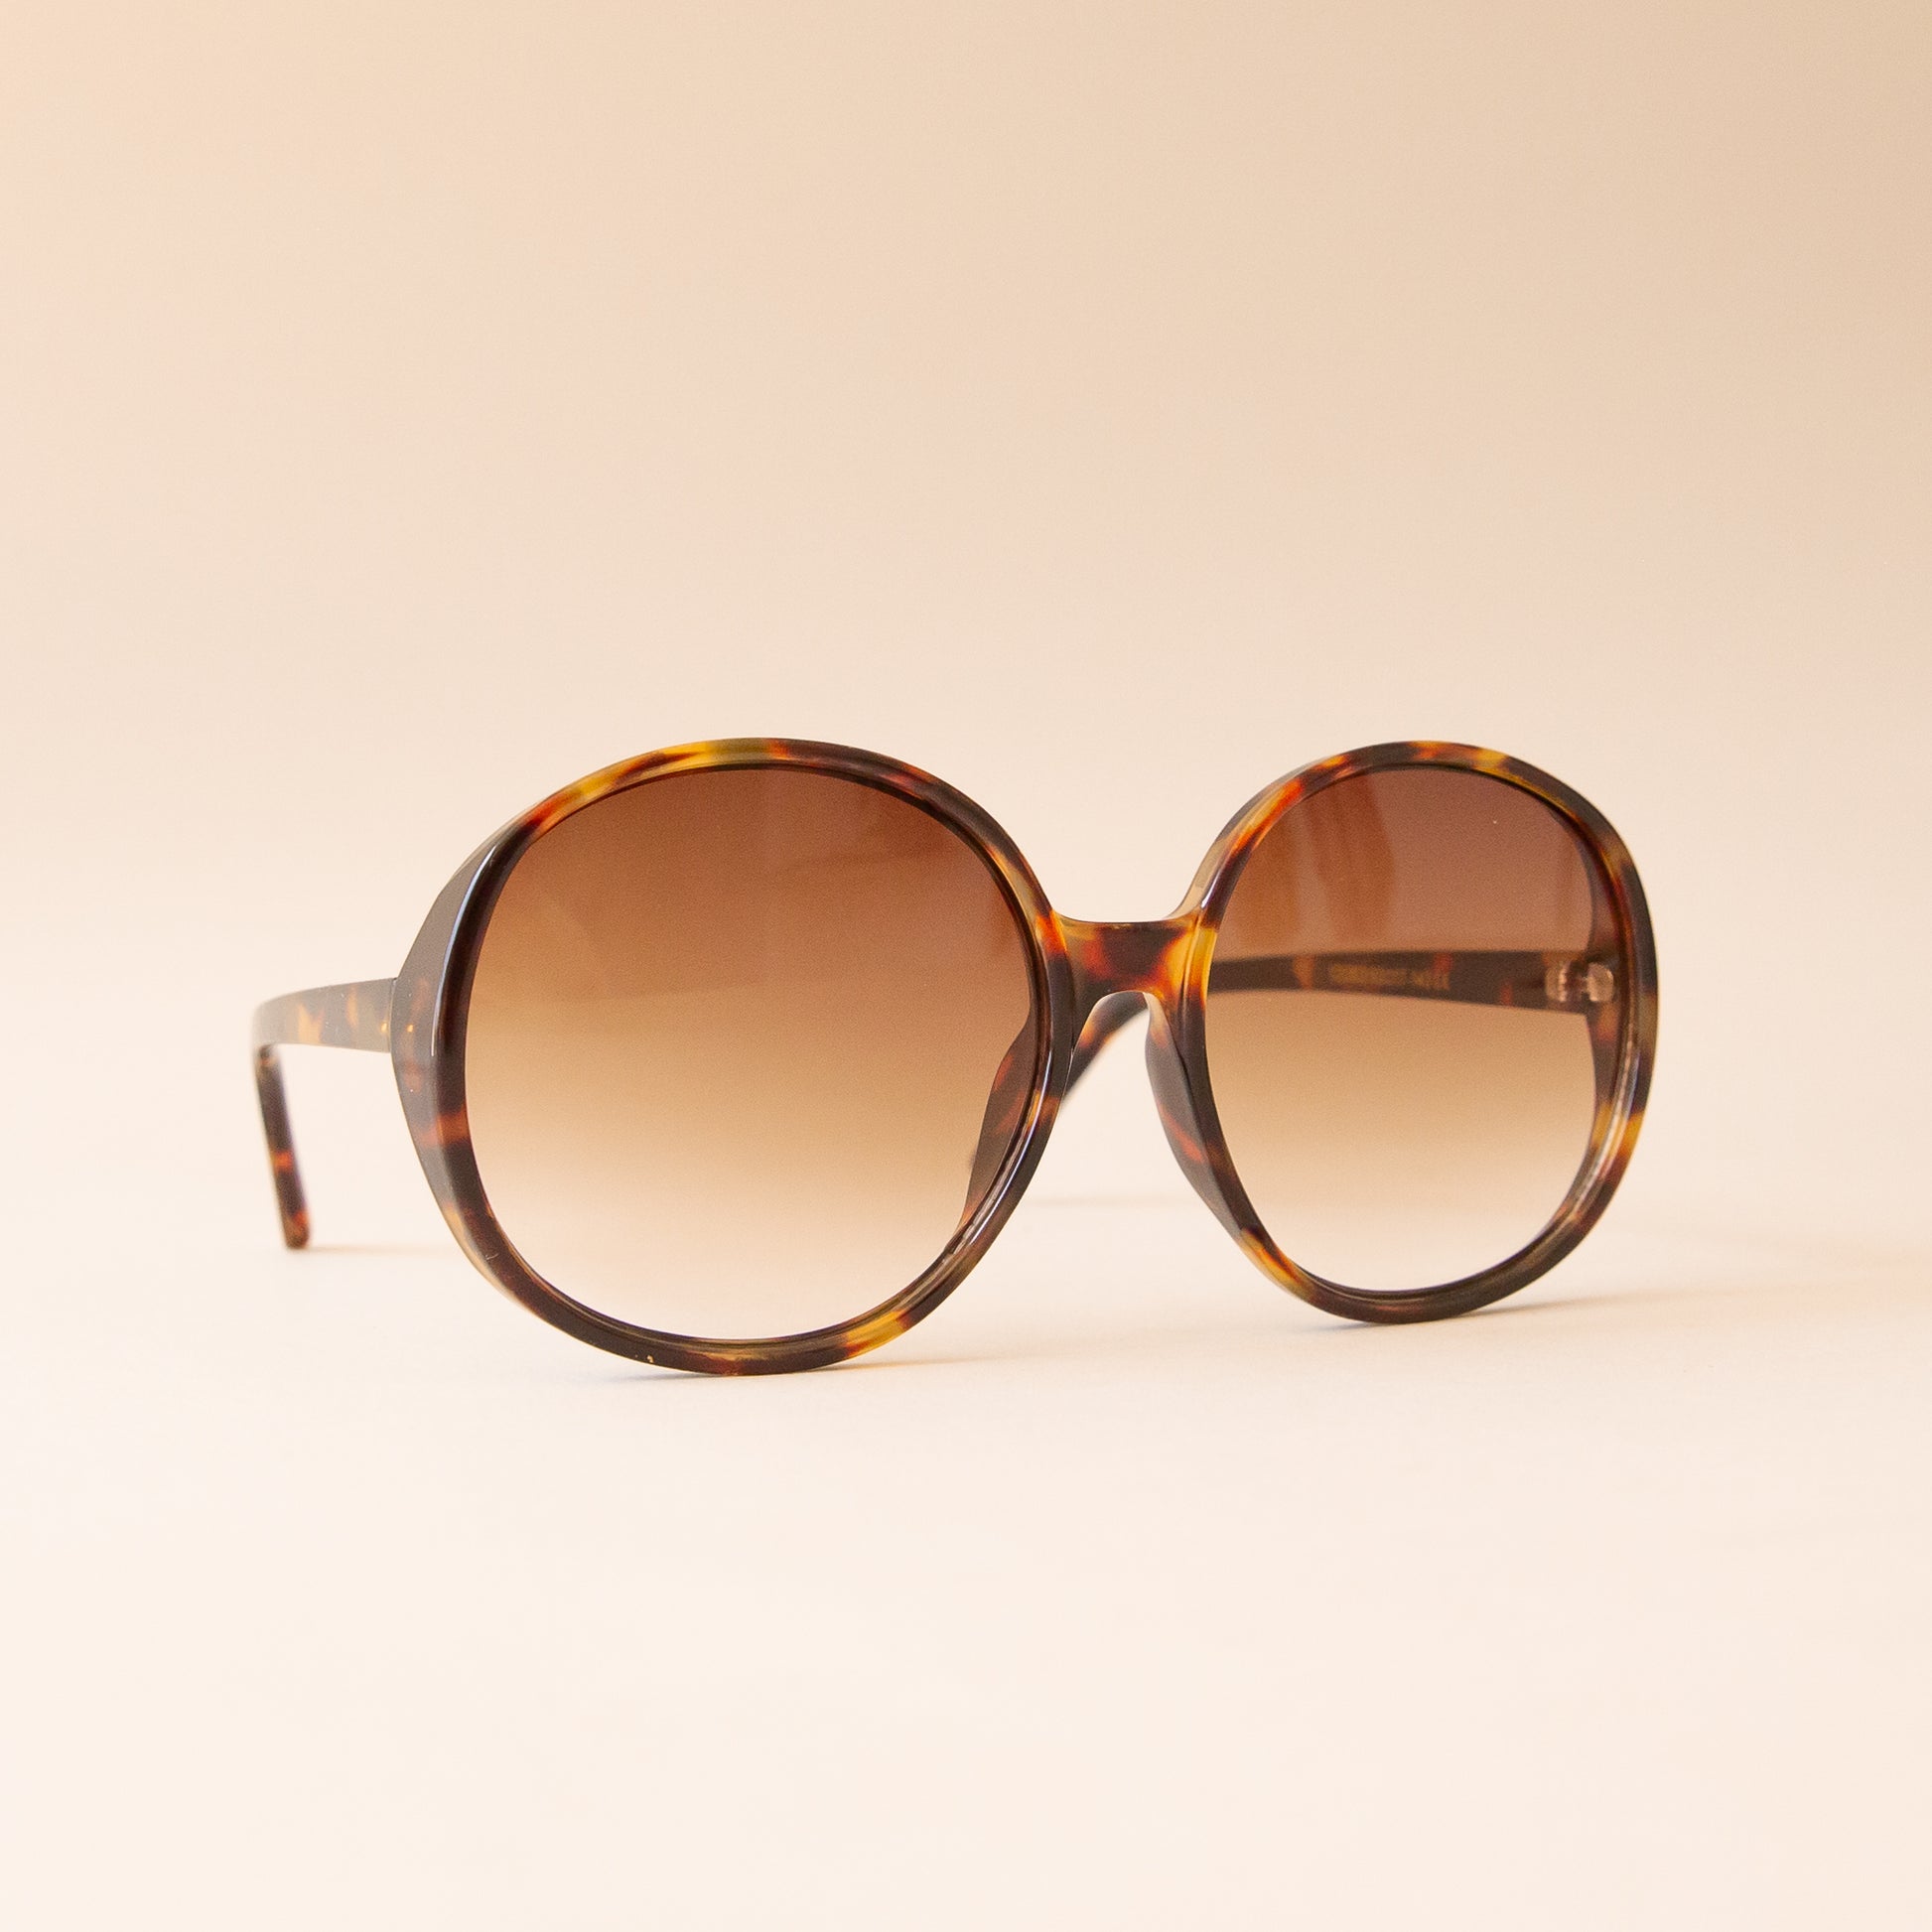 A tortoise brown pair of round oversized sunglasses with a light brown lens.